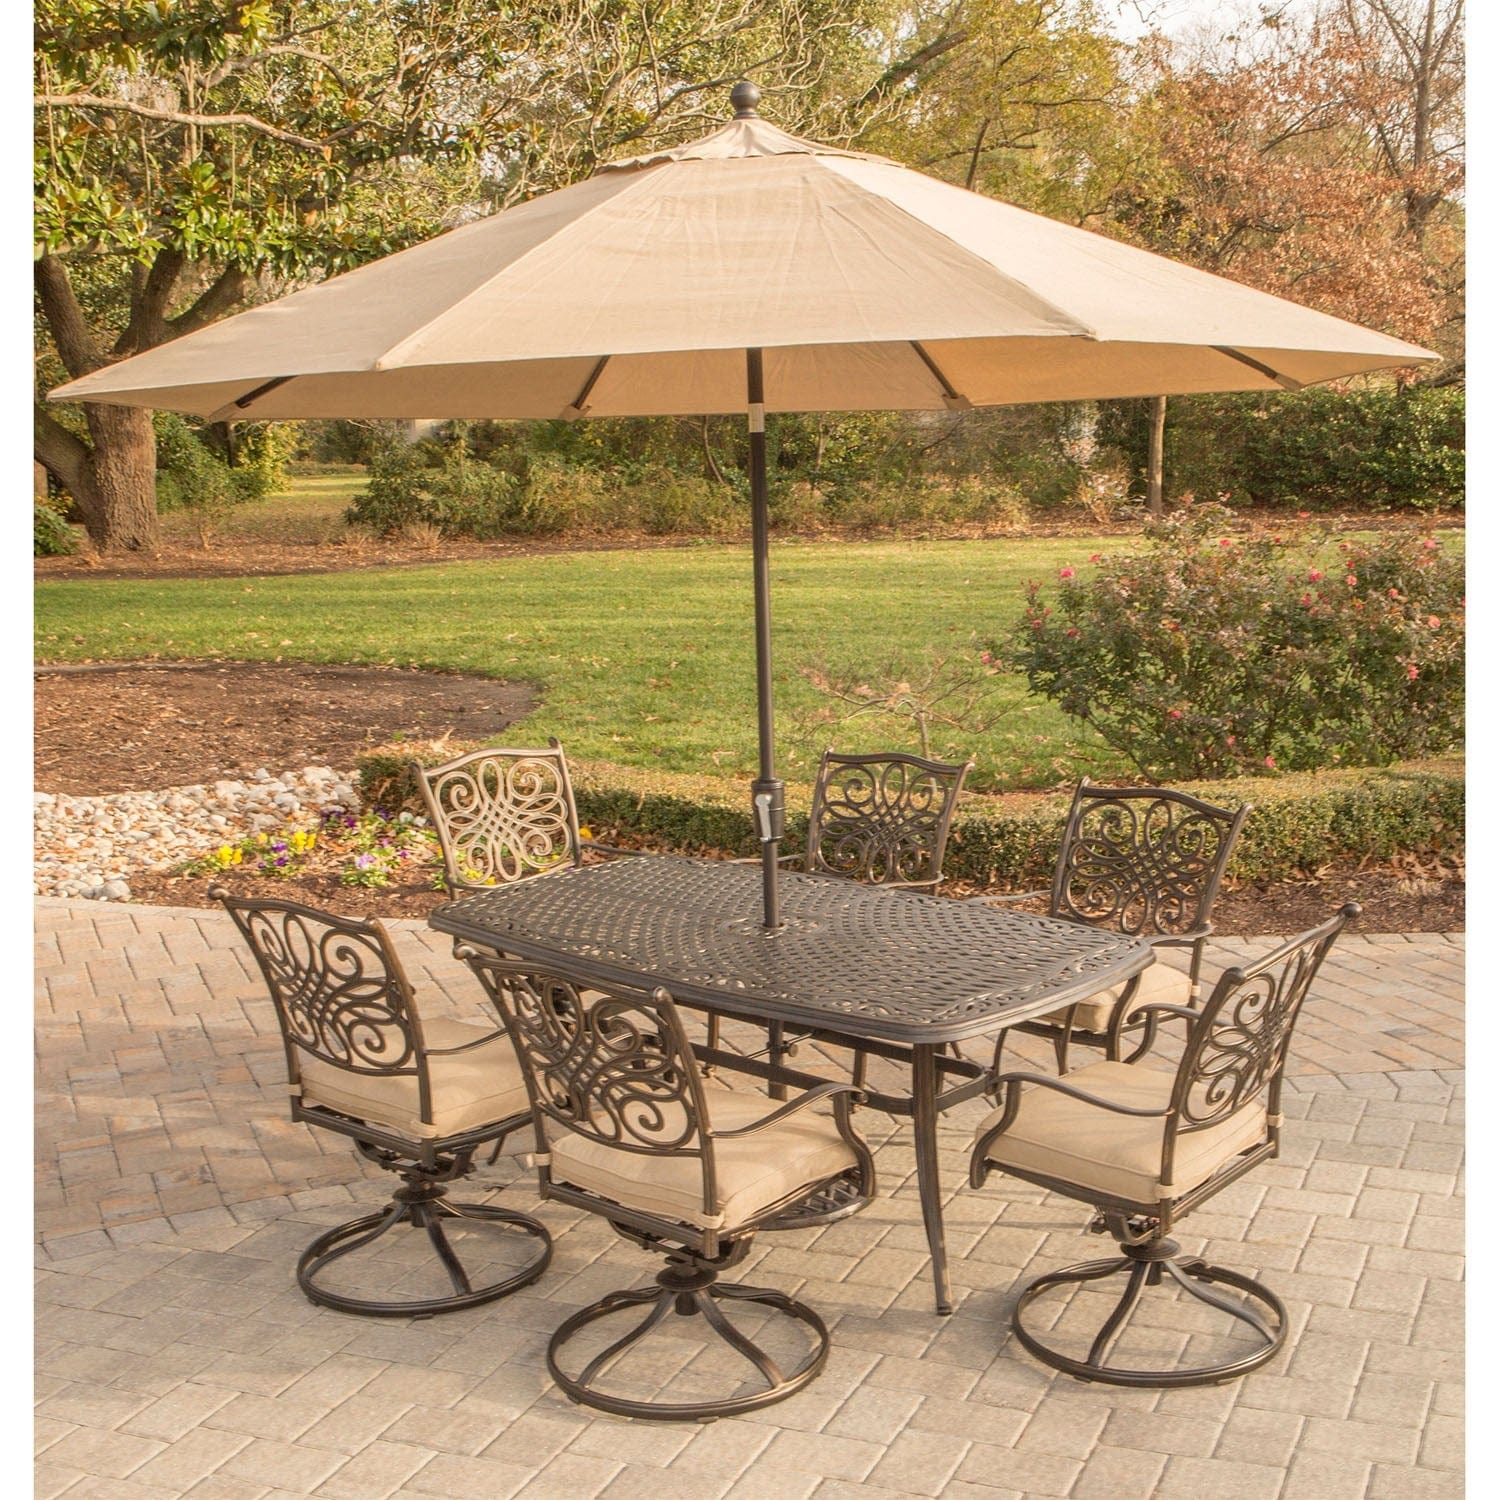 Hanover Patio Furniture Hanover - Traditions 7-Piece Dining Set in Tan with 72 x 38 in. Dining Table, 9 Ft. Table Umbrella, and Umbrella Stand